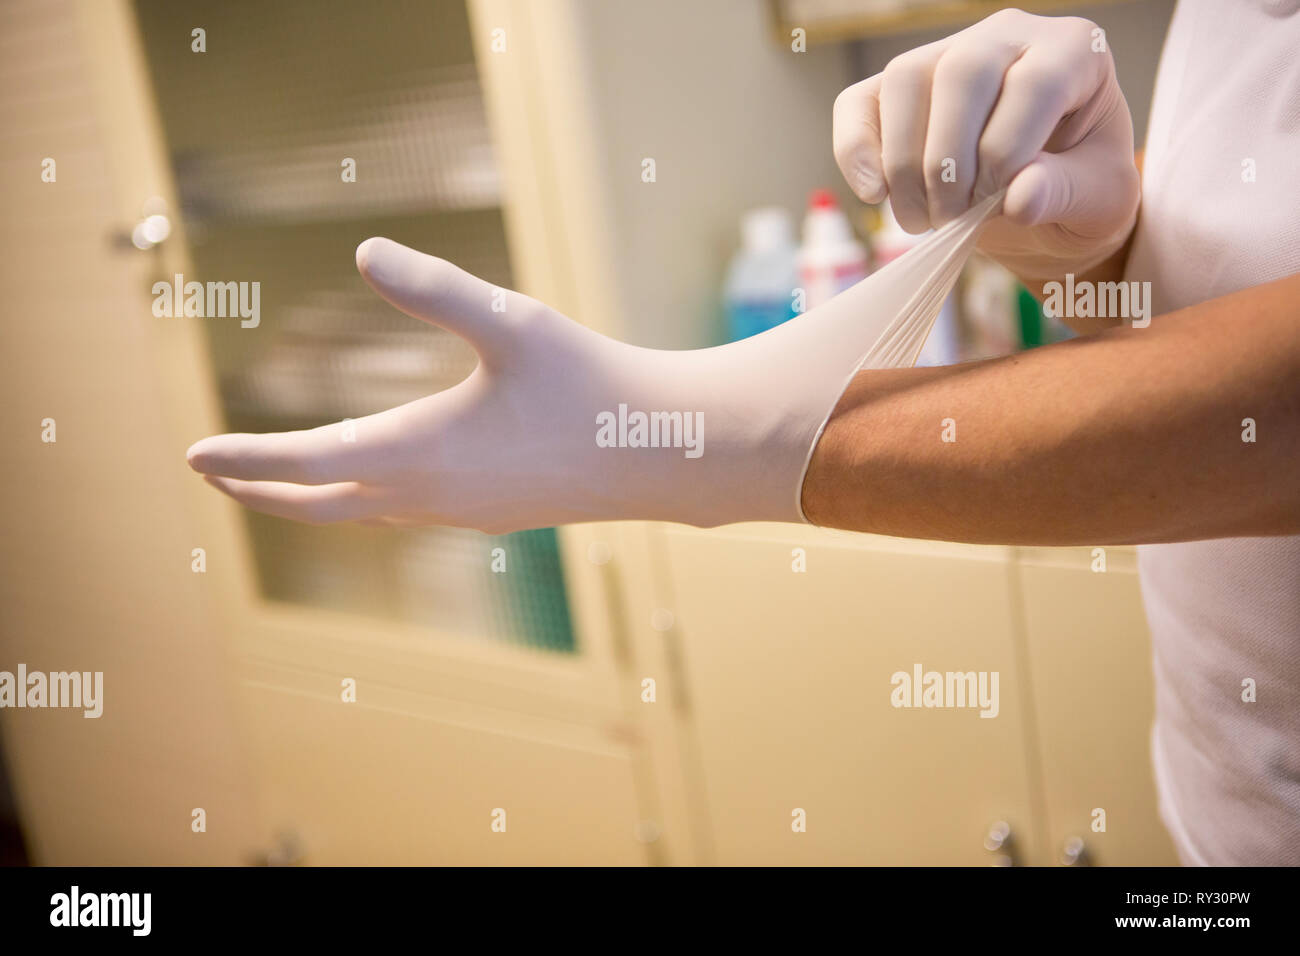 Protective latex gloves being put on in a healthcare environment Stock Photo